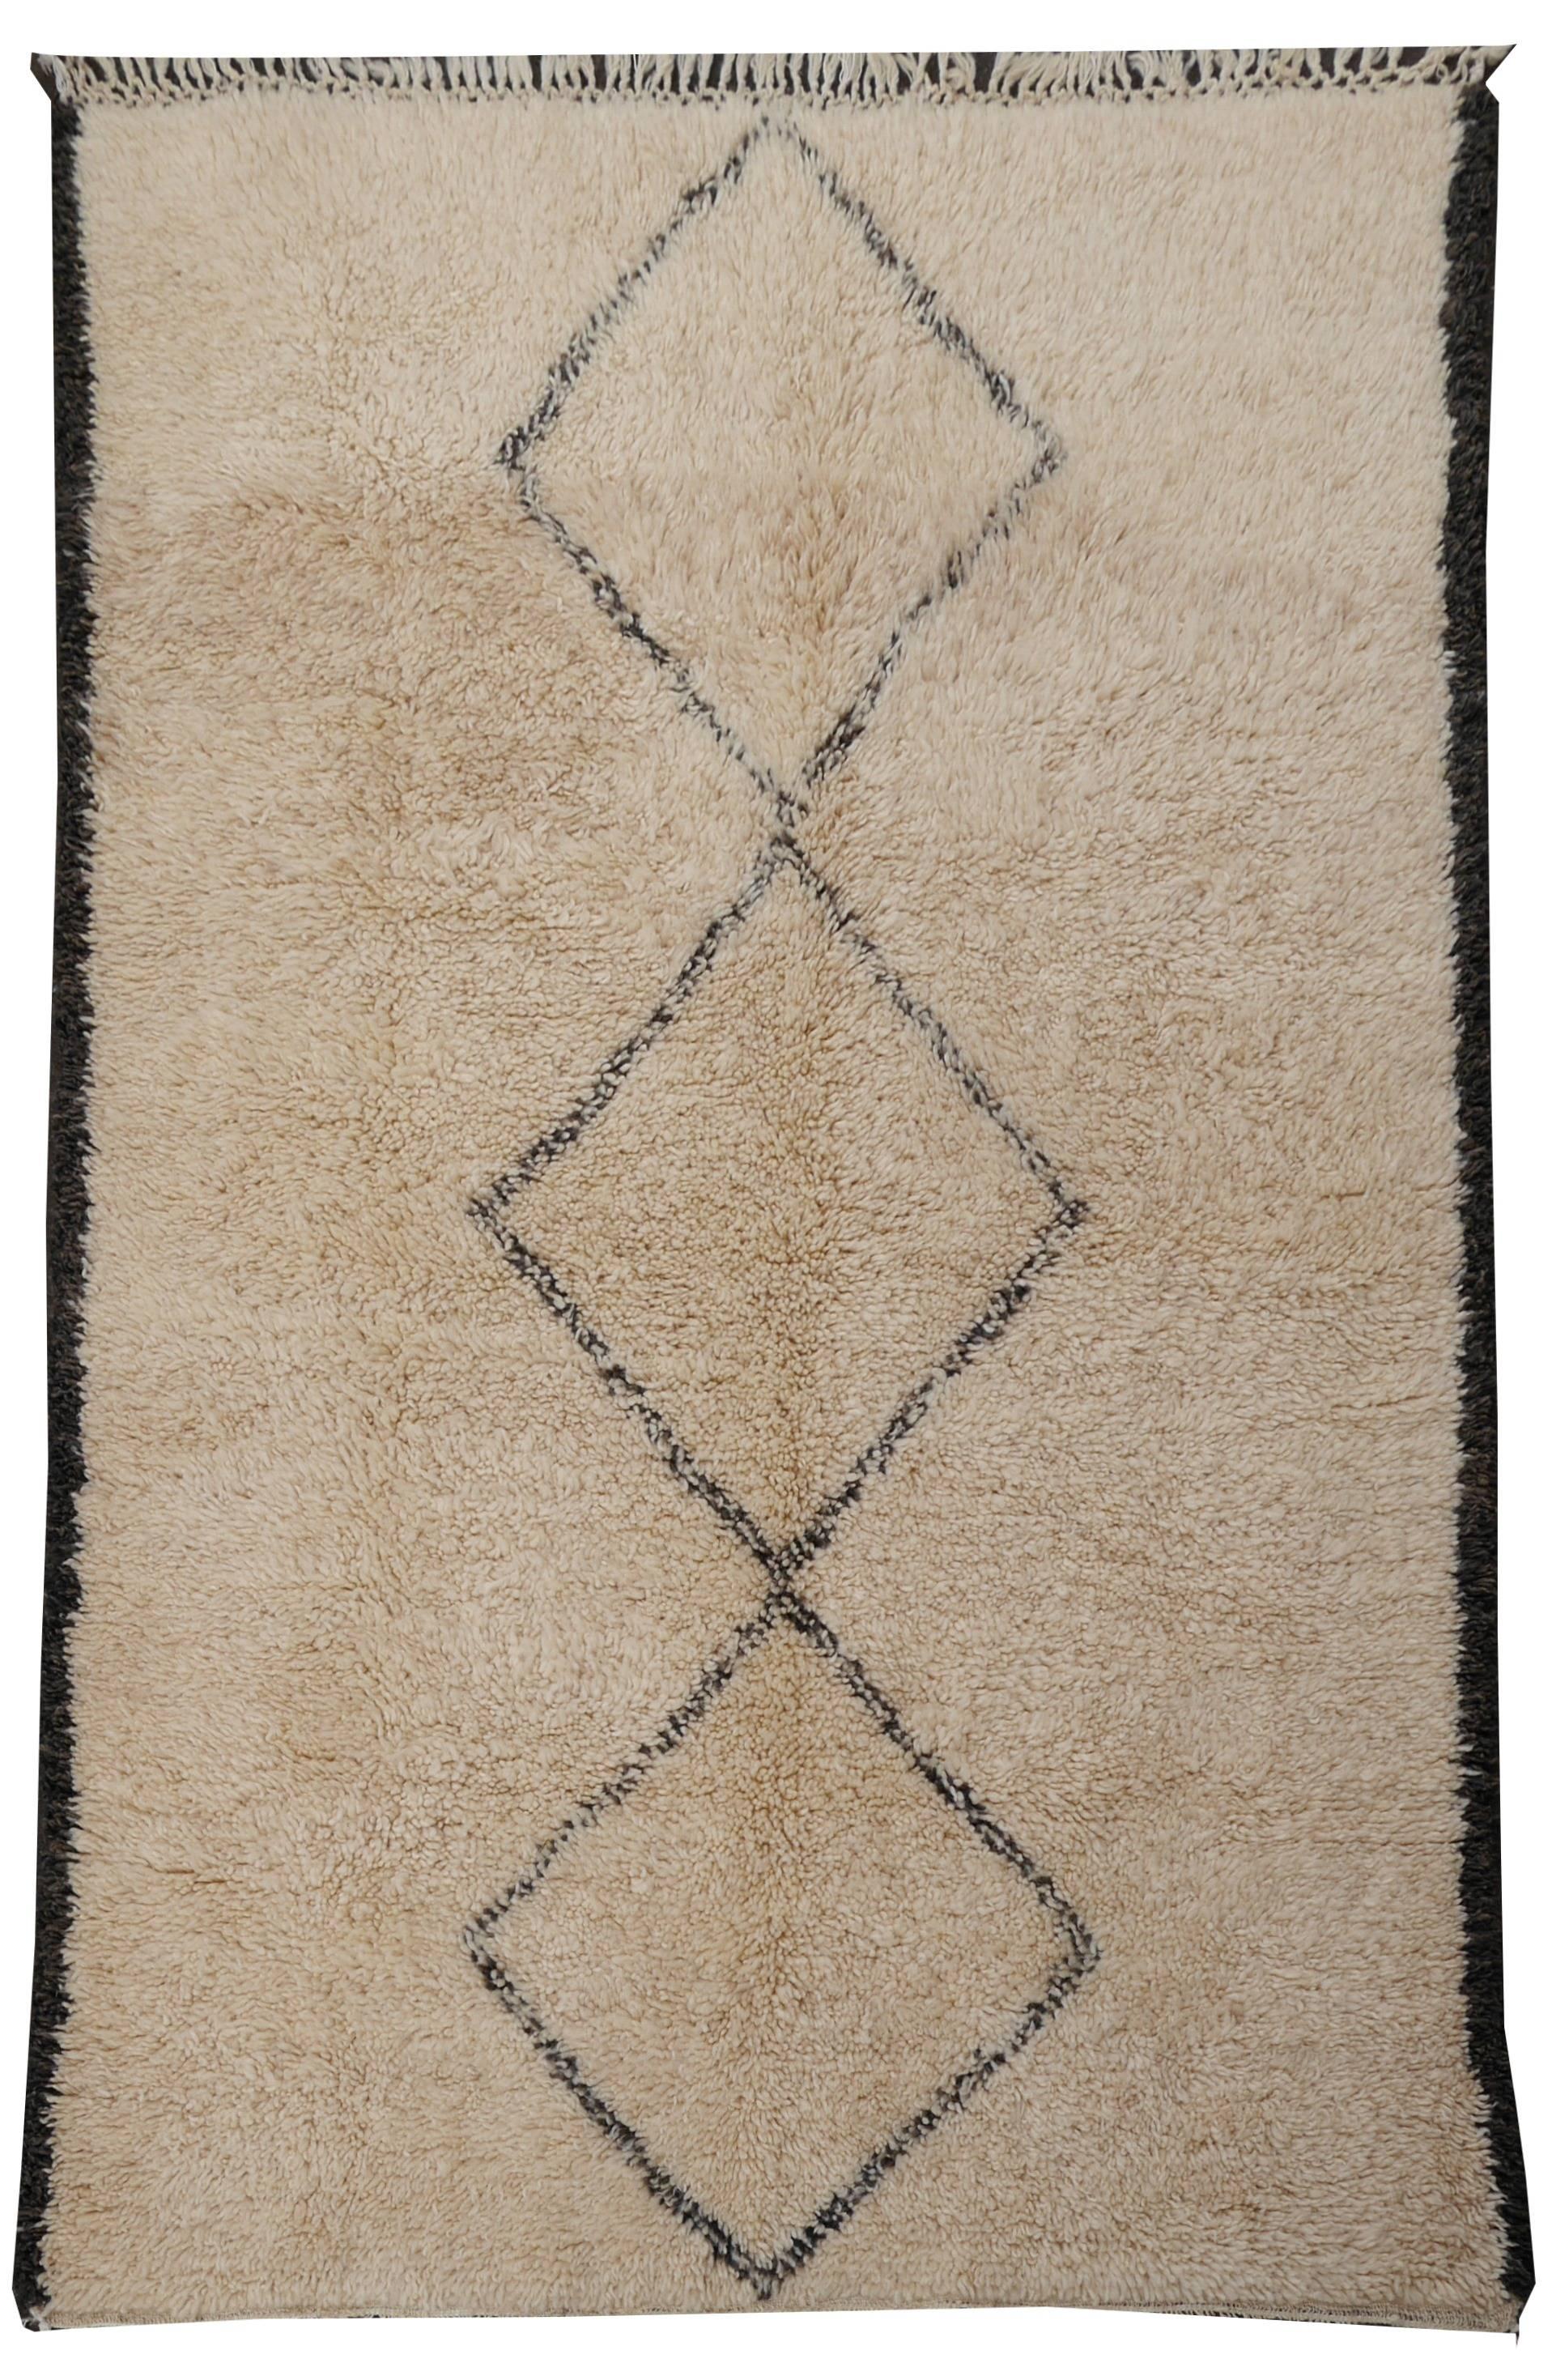 Contemporary North African Moroccan Berber Rug Ivory and Dark Brown 3